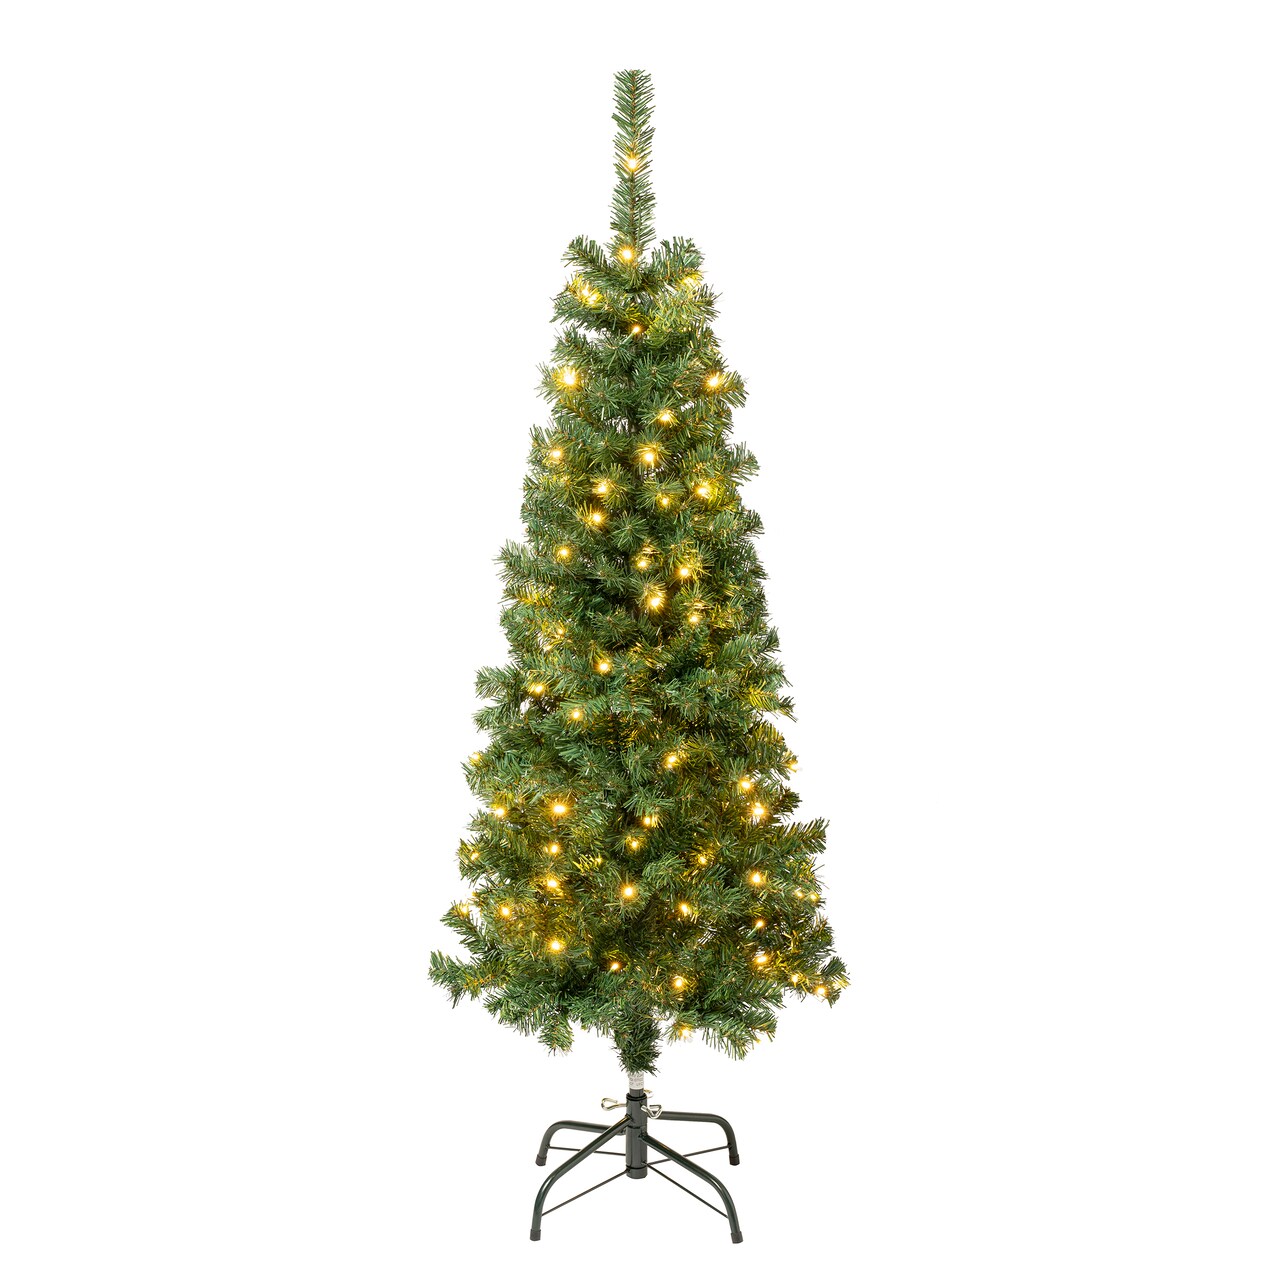 National Tree Company First Traditions Pre-Lit Artificial Linden Spruce Christmas Tree, Warm White LED Lights, Plug In, 4.5 ft